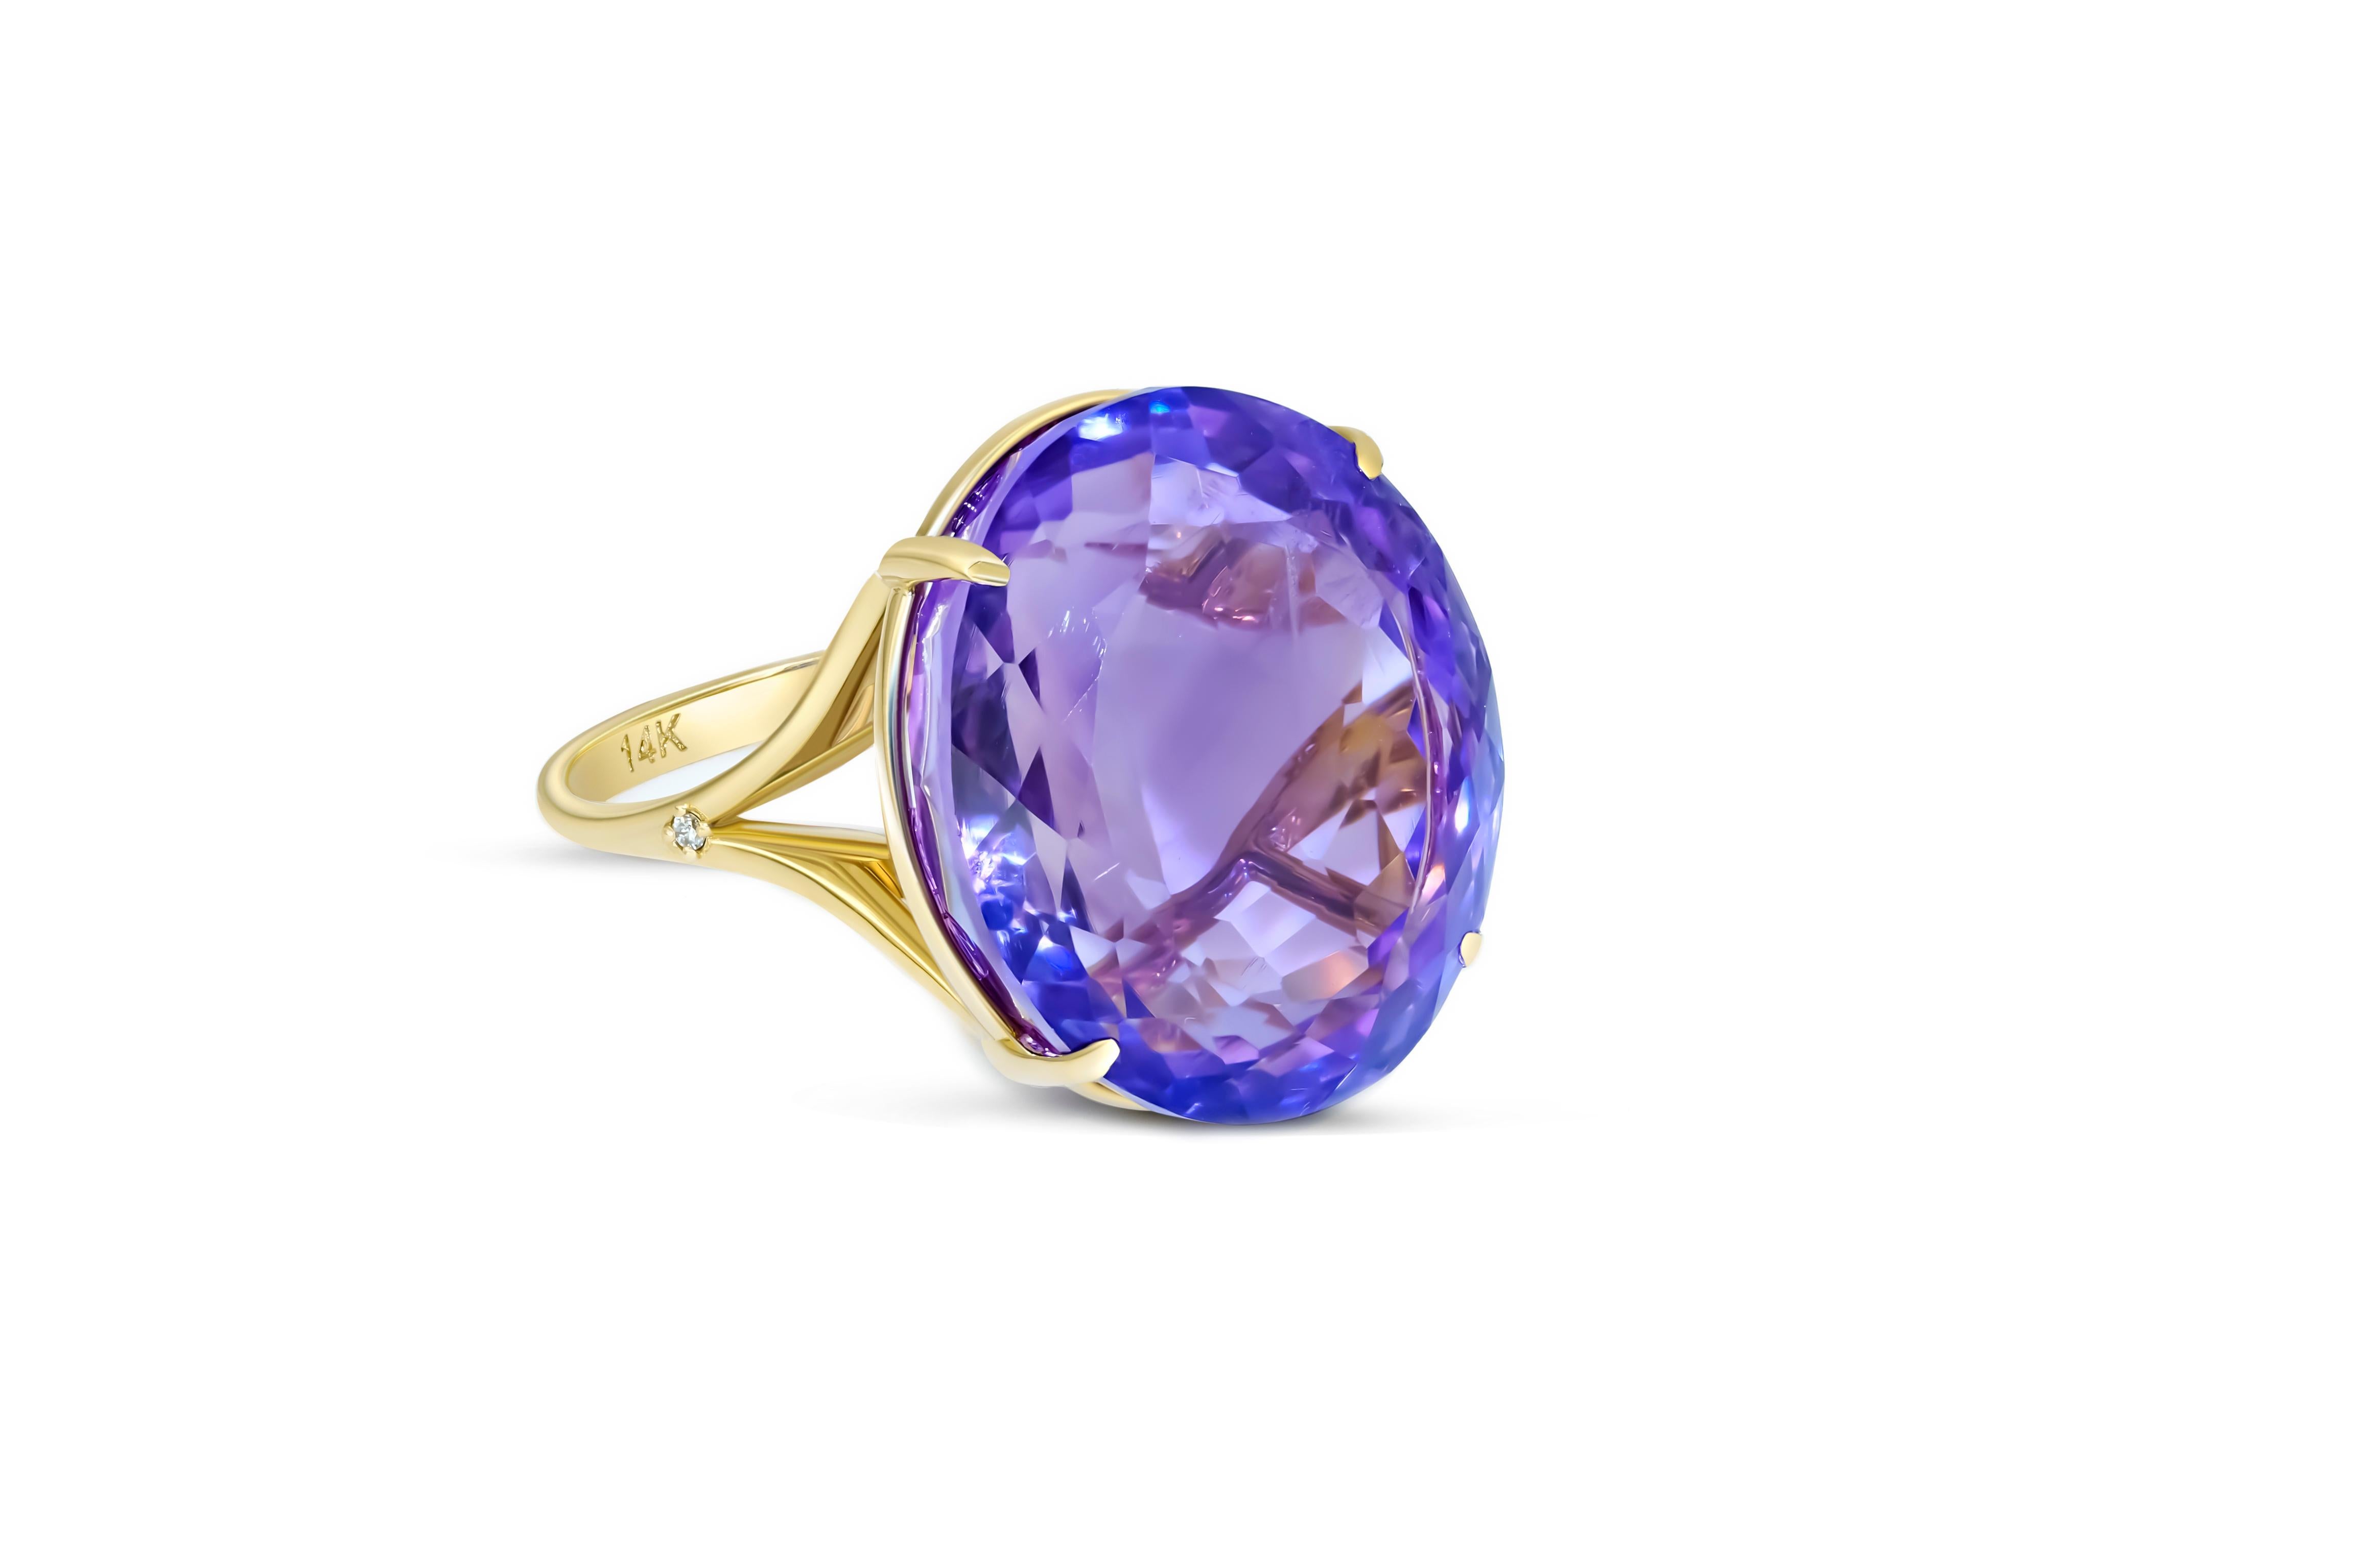 14k gold Amethyst and diamonds ring. 
Purple gemstone Ring. Cocktail amethyst ring. February birthstone ring. Oval amethyst ring.

Metal: 14k gold
Weight: 4.5 g. depends from size

Gemstones:
Set with amethyst, color violet
Oval cut, aprx 10